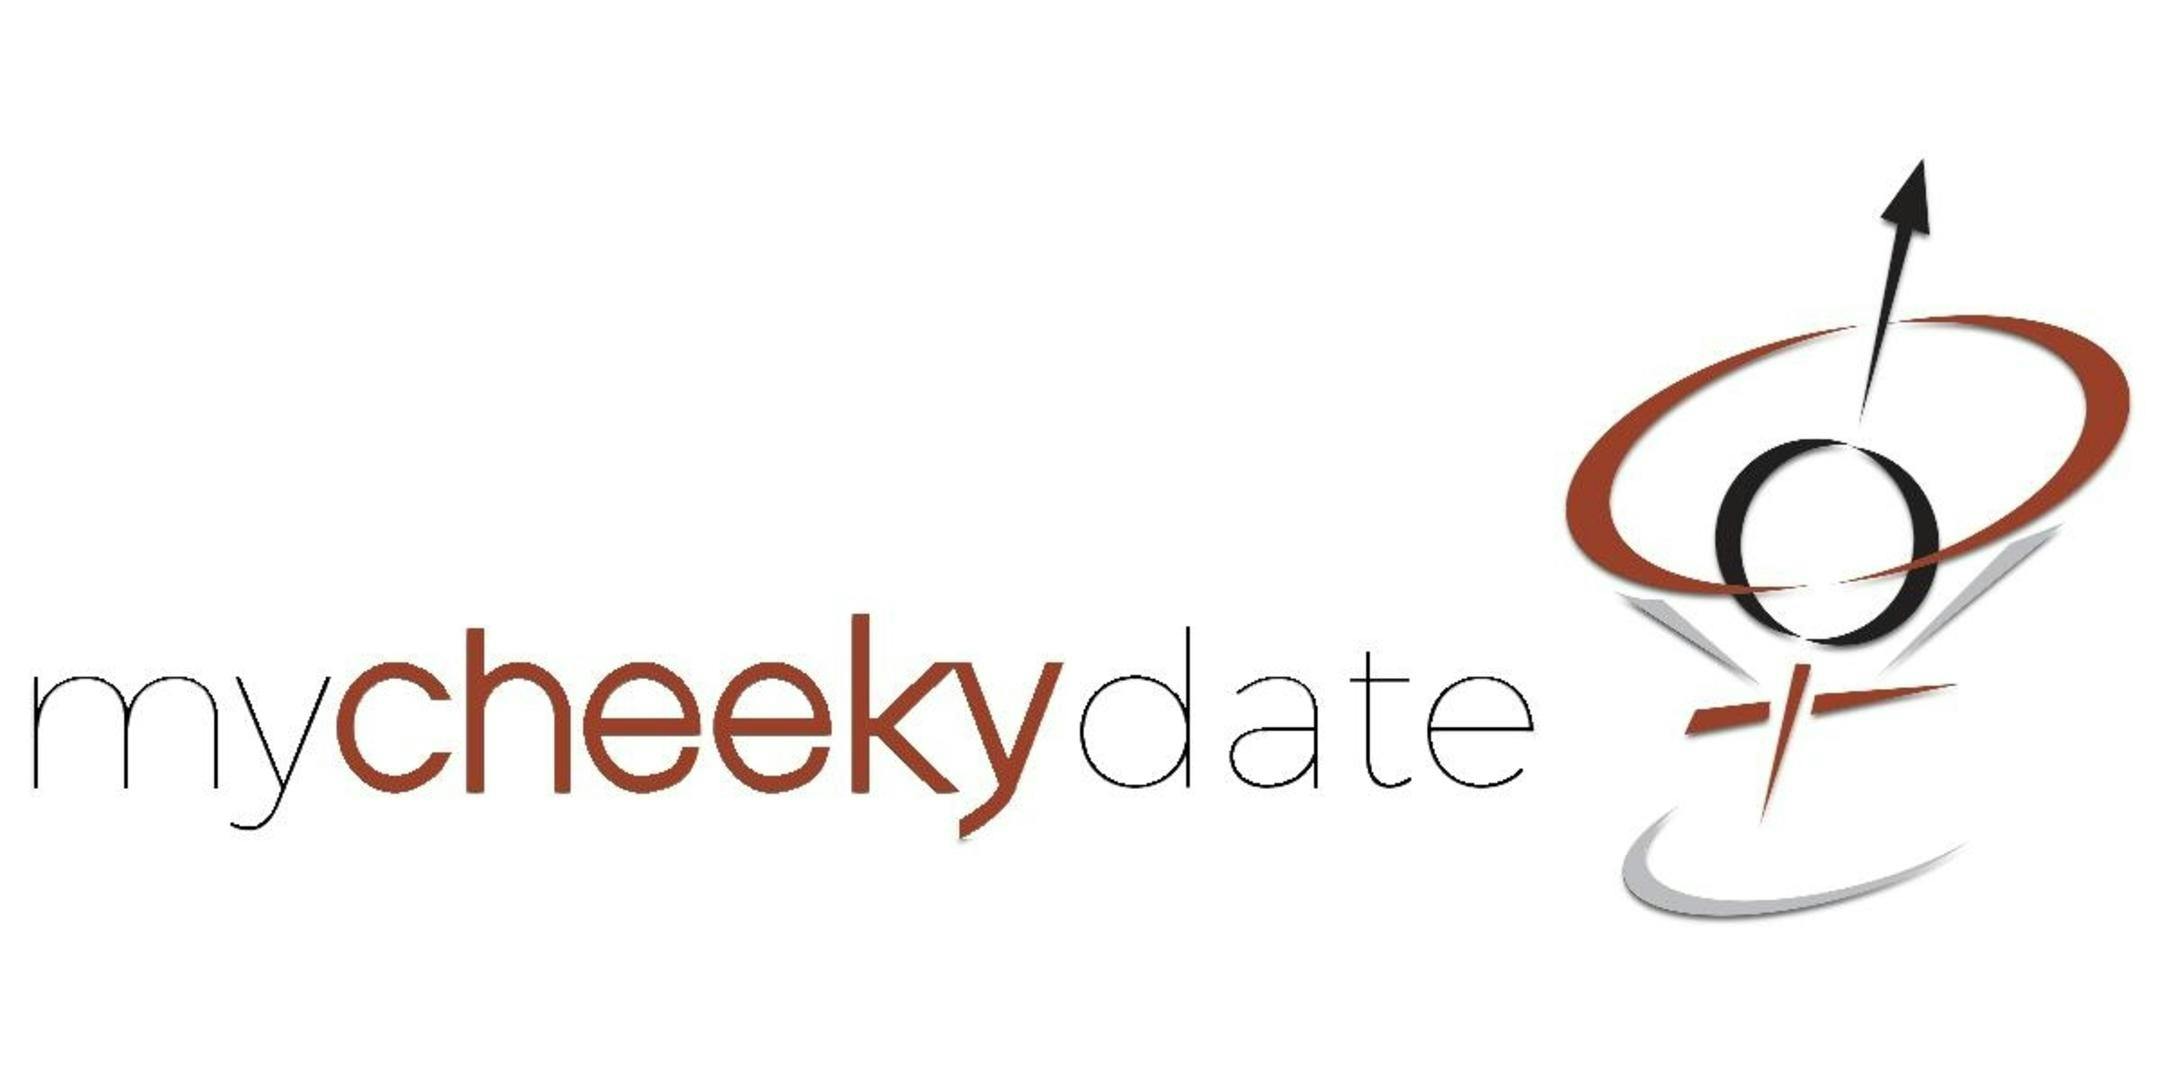 Let's Get Cheeky! Saturday Night Speed Dating | Sydney Singles Events 